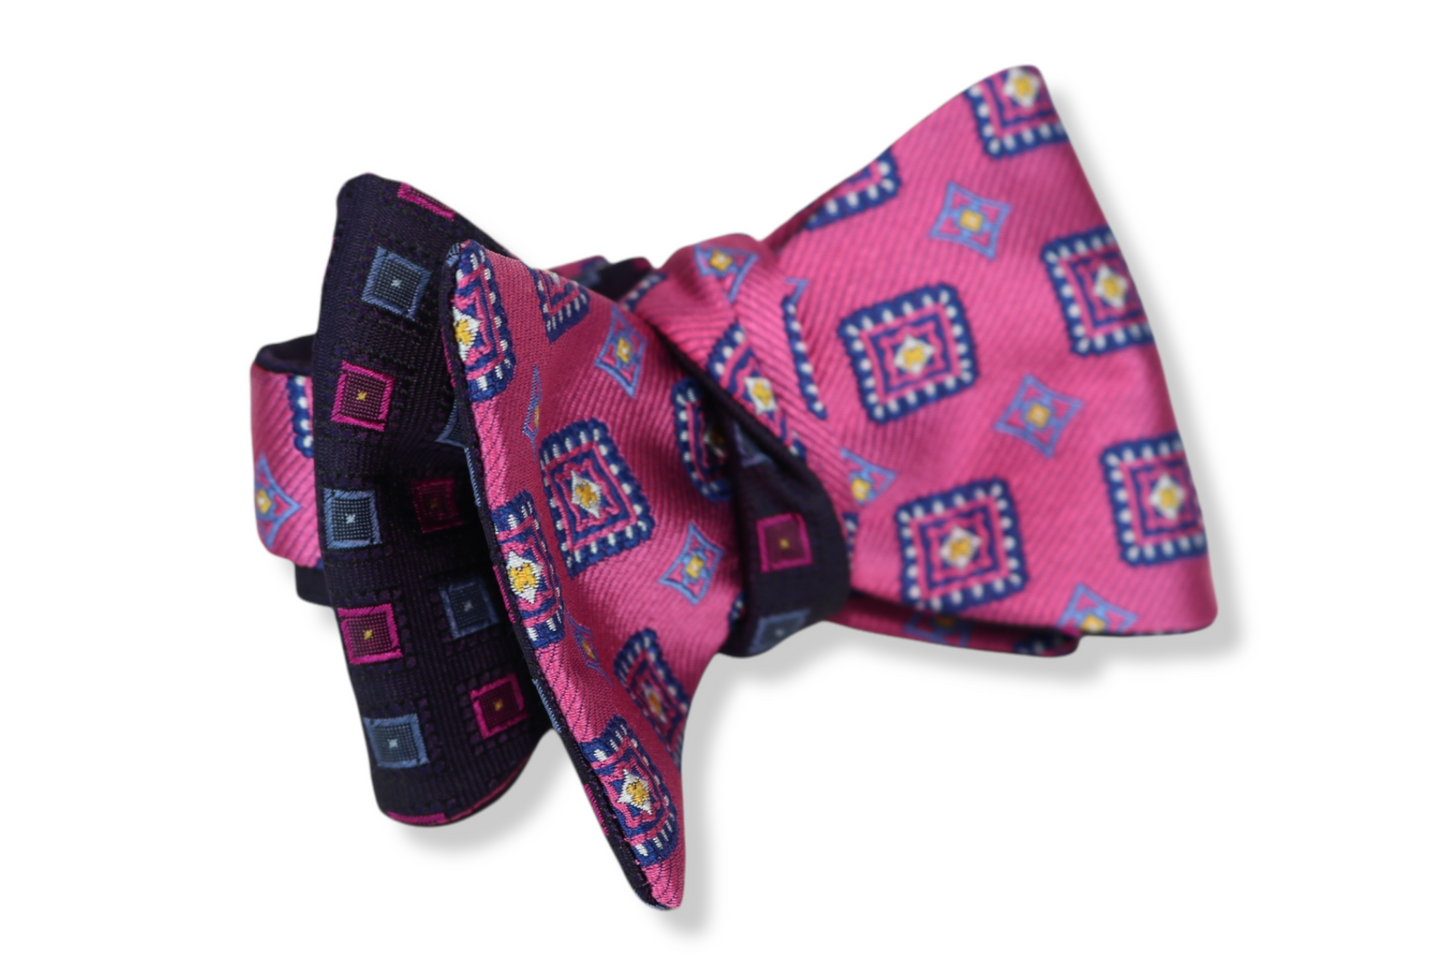 The Florian Reversible Butterfly Bow Tie